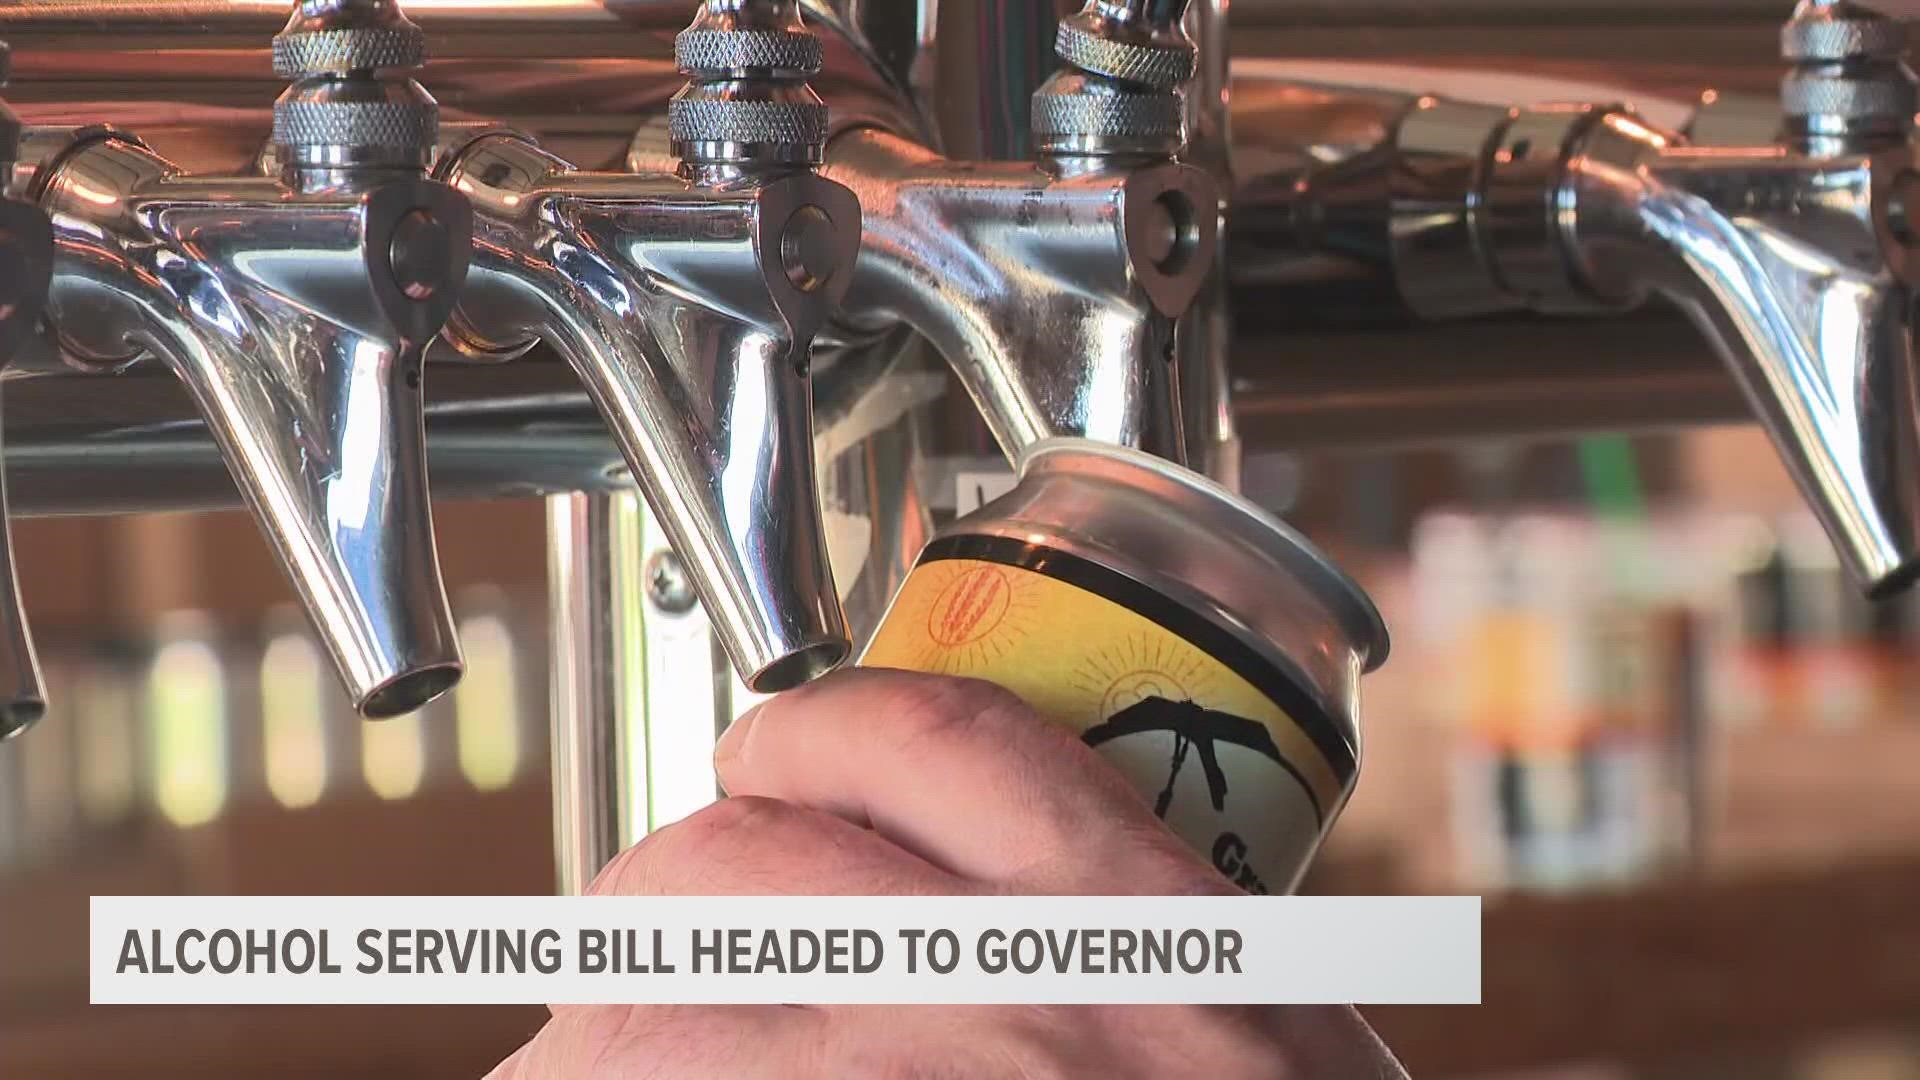 House Bill 4232 was passed by both the State Senate and State House, and it could have a big impact on the restaurant industry if signed.